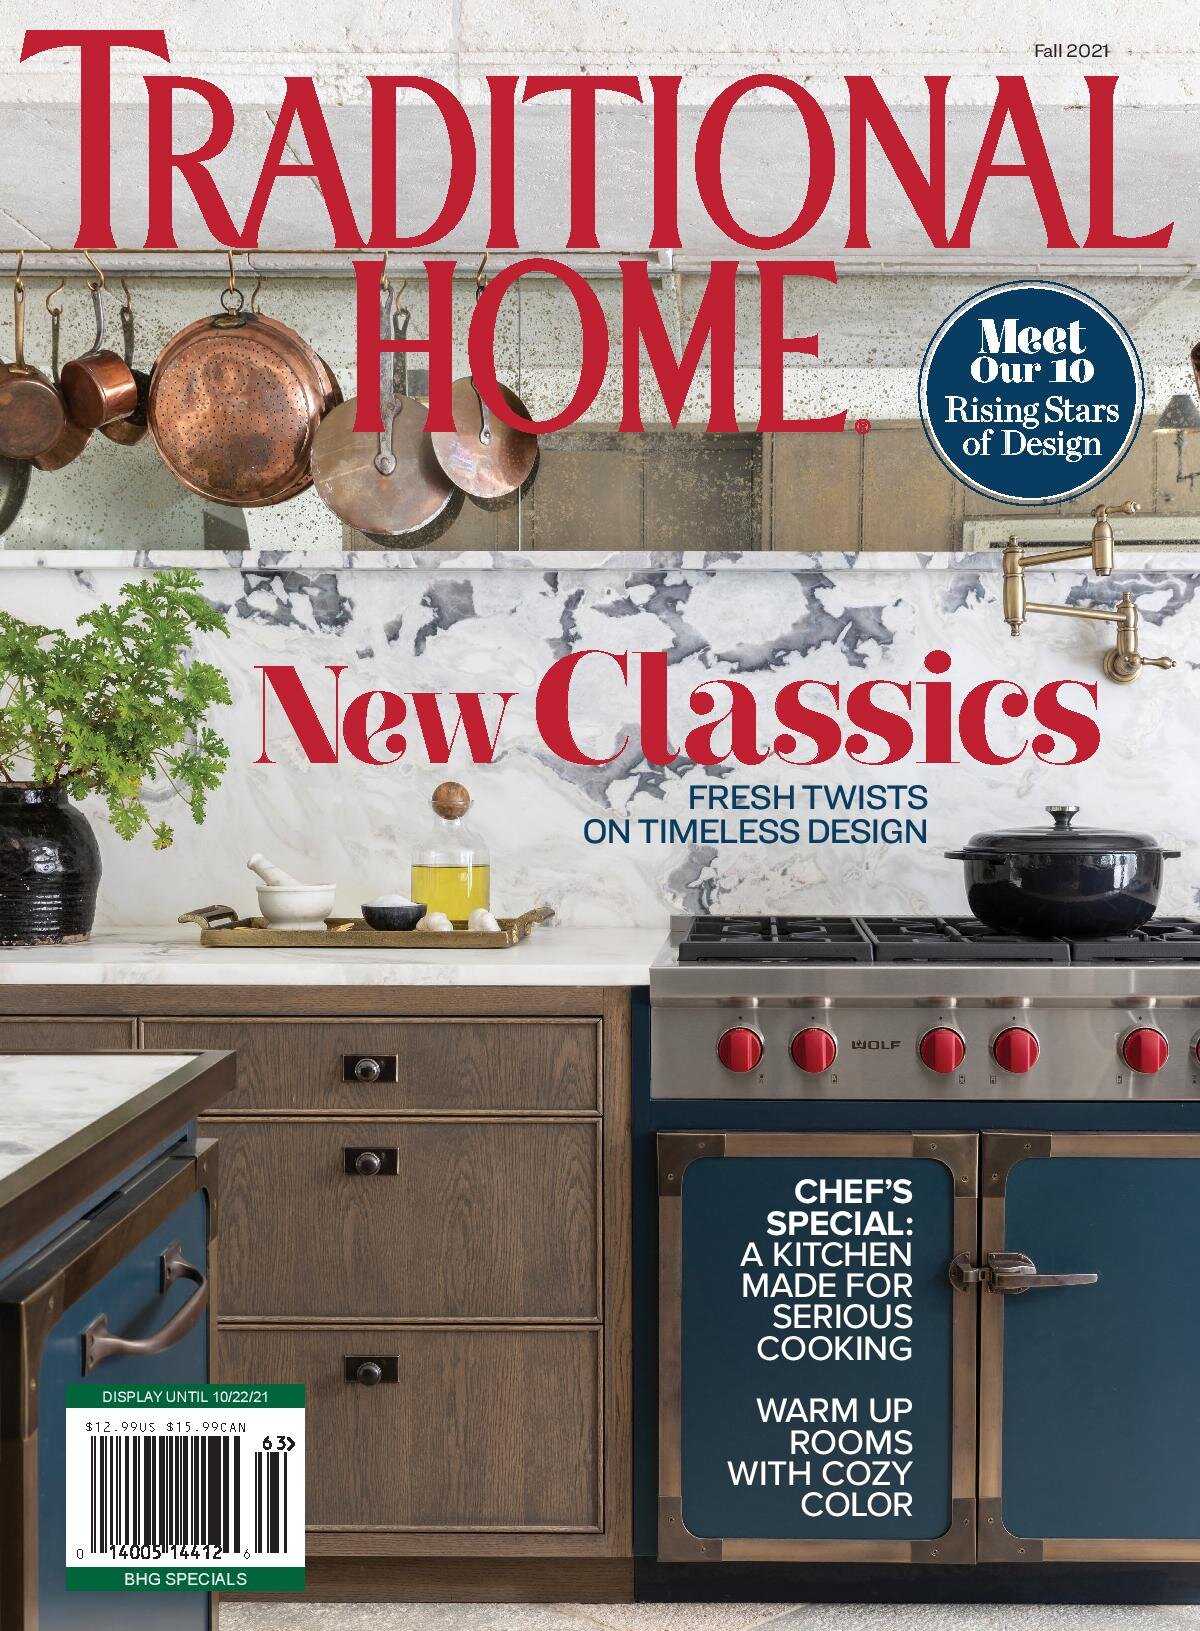 nwd_traditional-home_cover.jpg